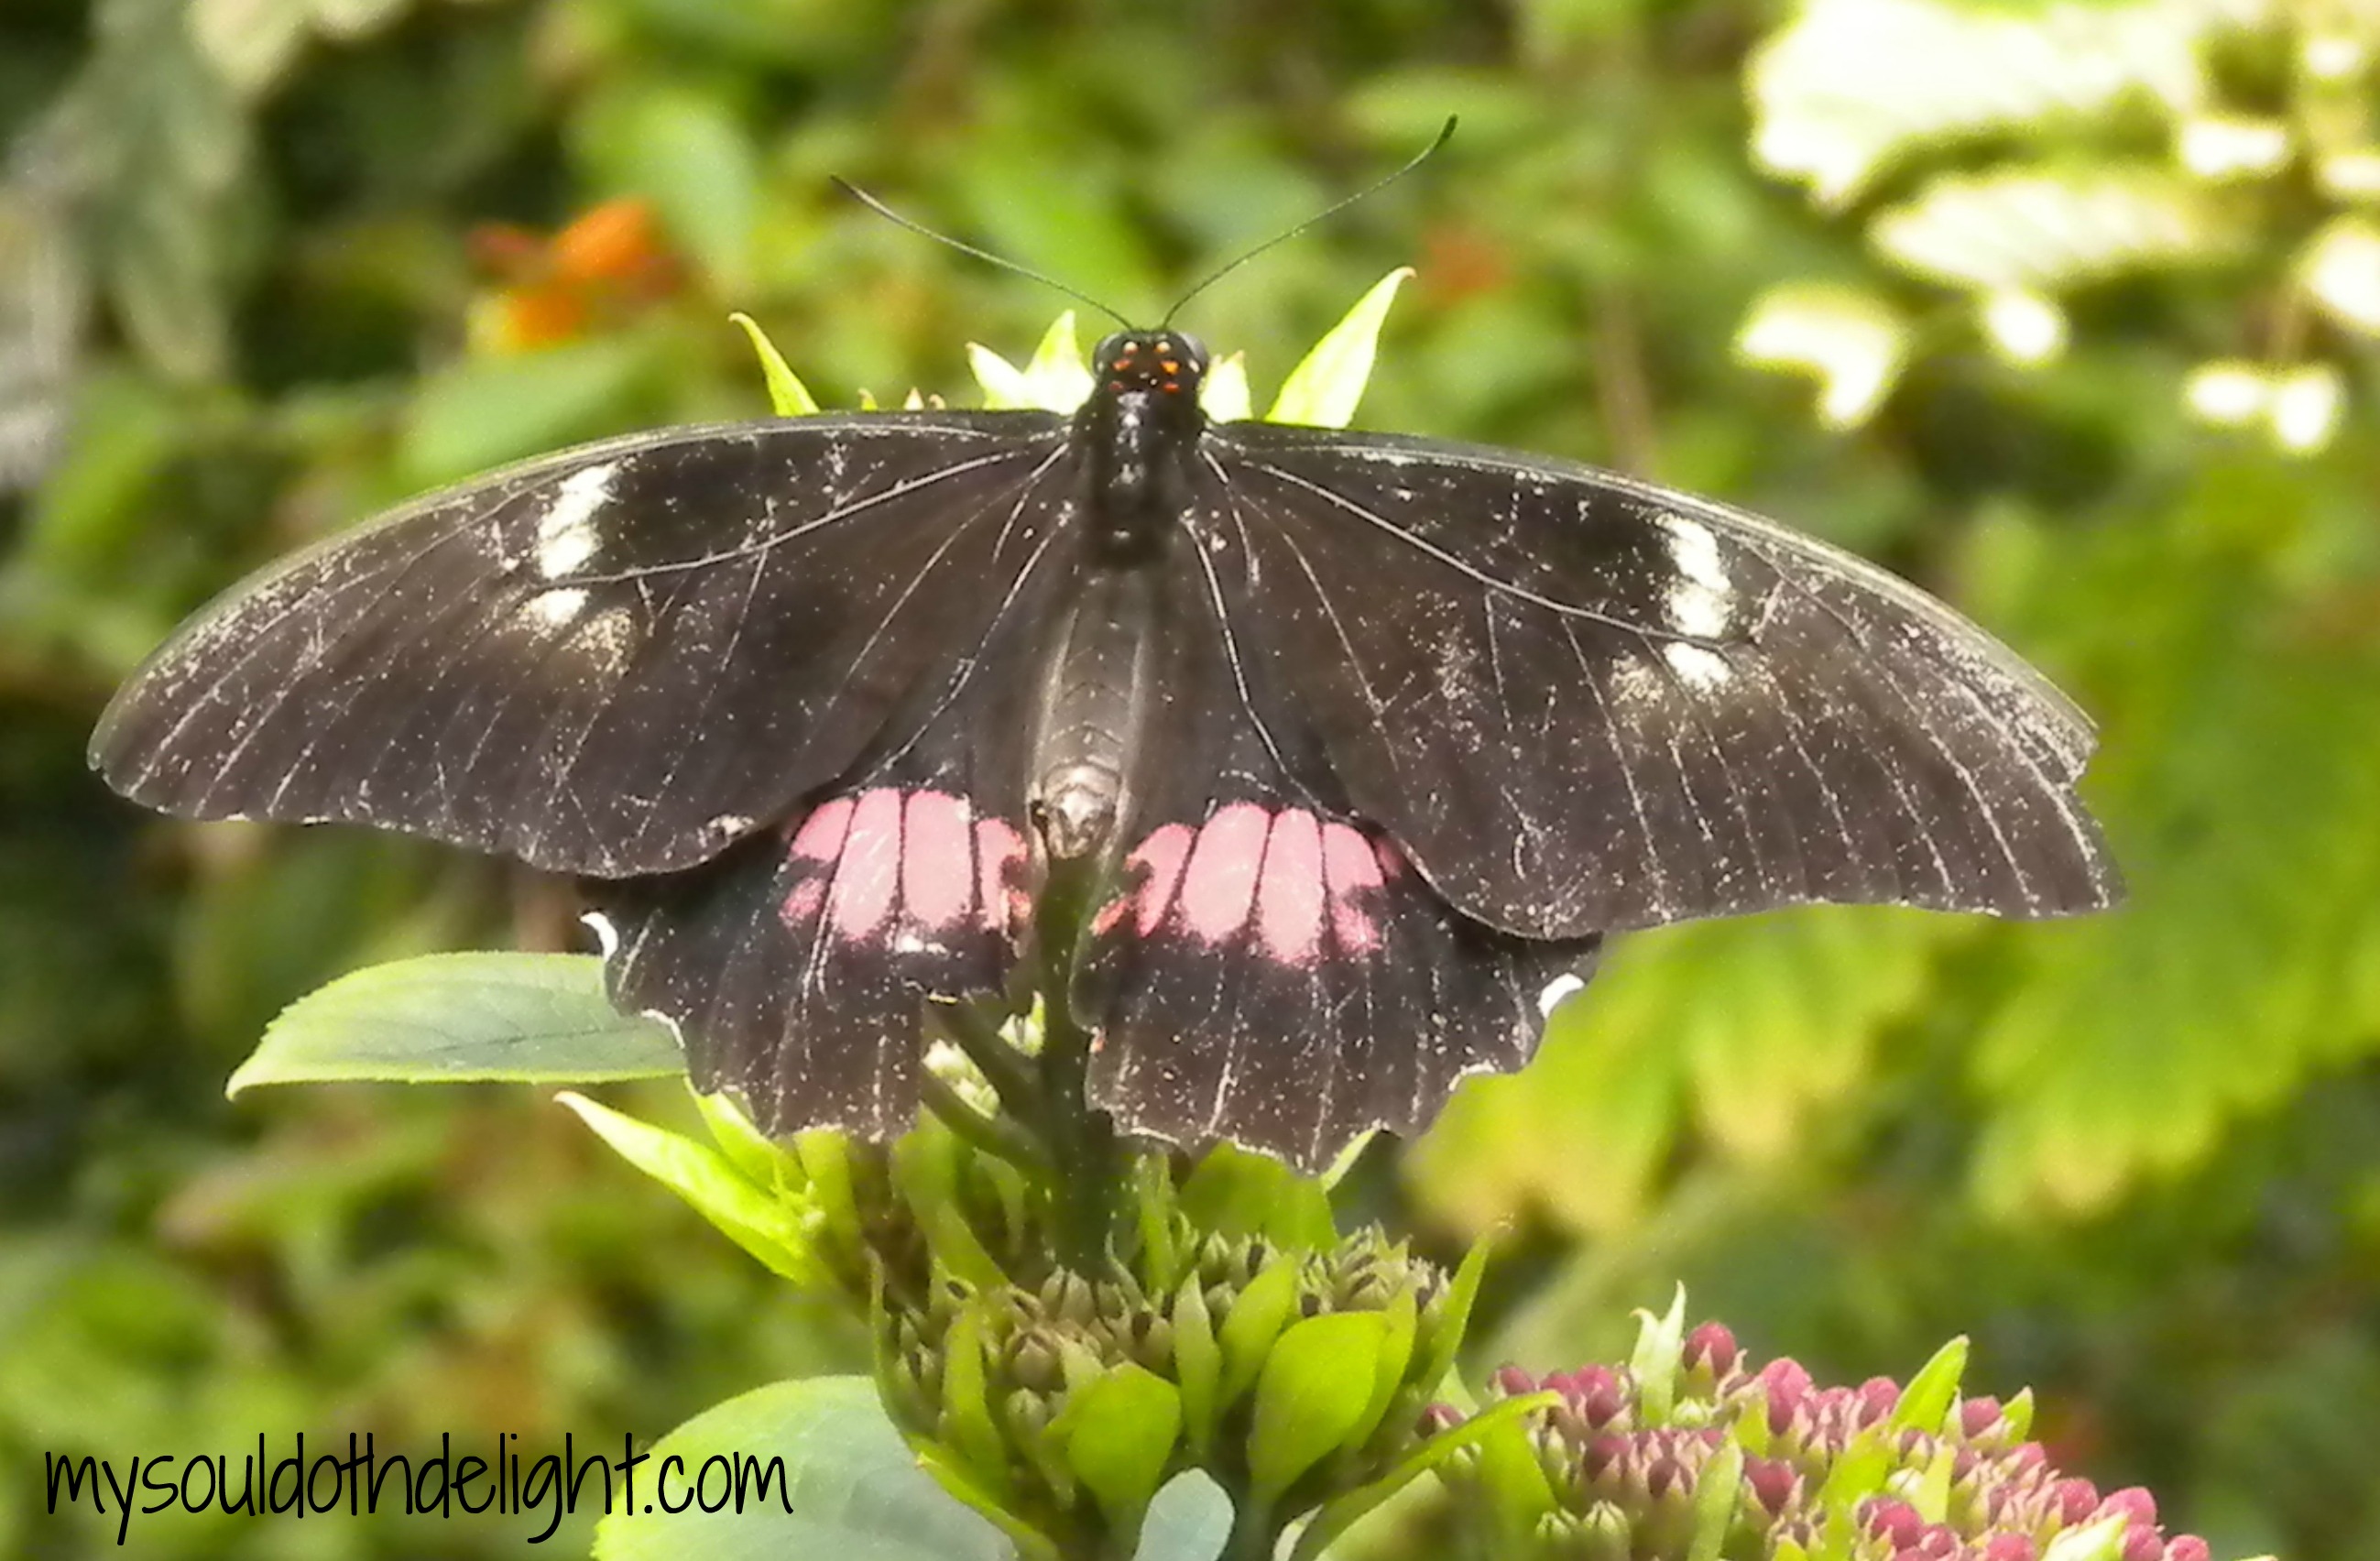 A Trip to the Zoo’s Butterfly House | My Soul Doth Delight…